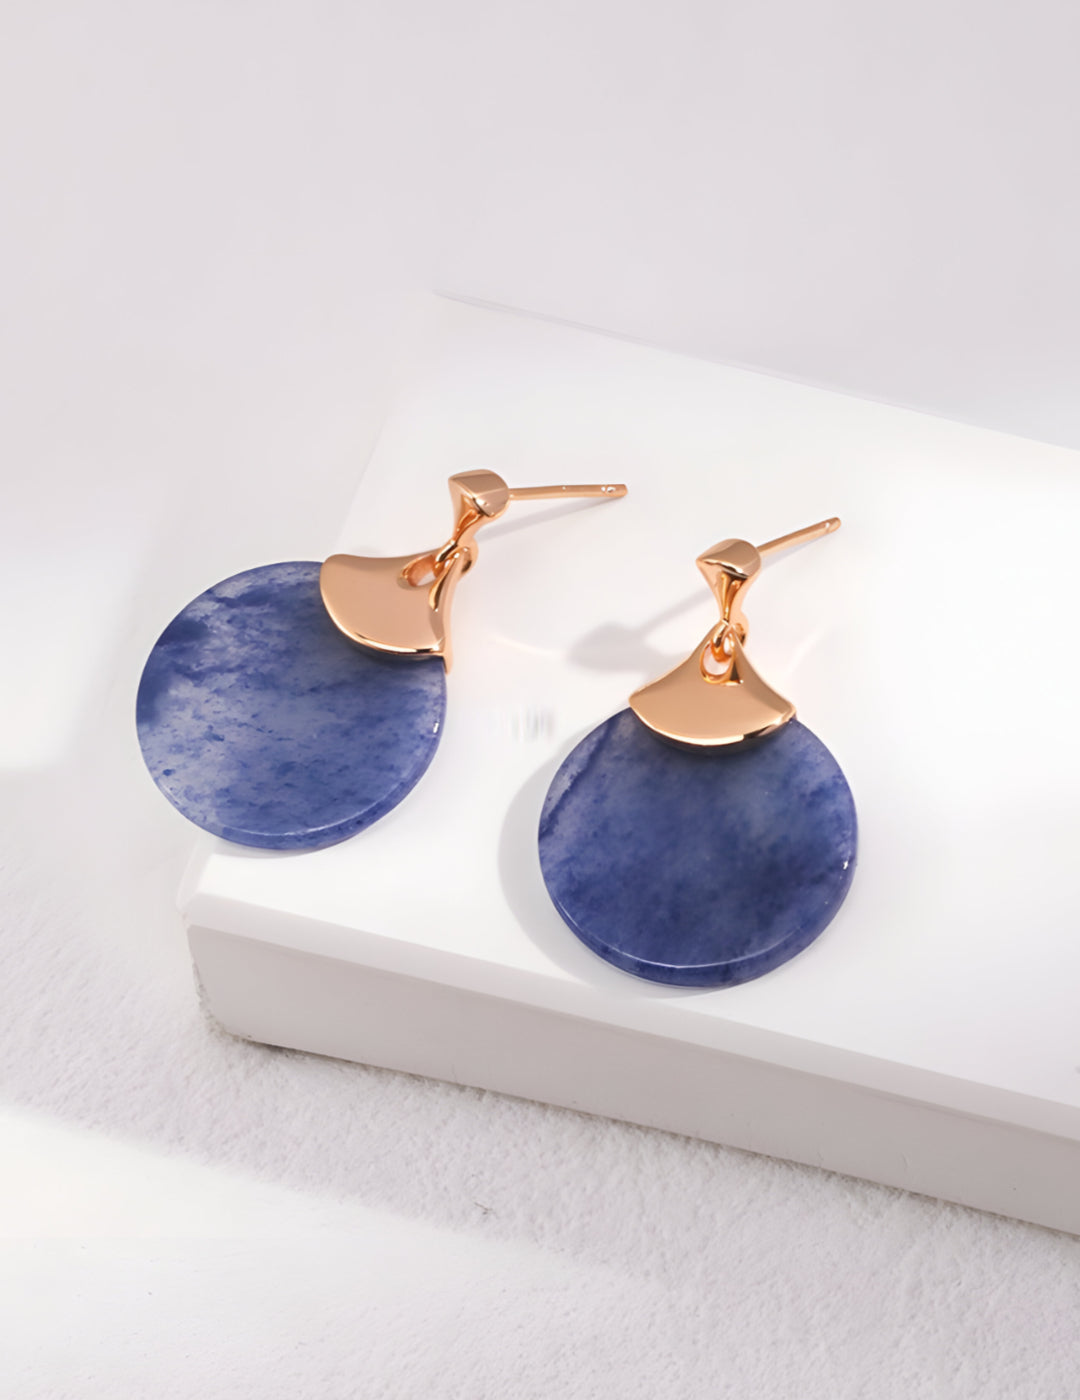  Serenity in Blue - Sterling Silver Dongling Jade Earrings - S925 sterling pure silver - 18K Gold Vermeil